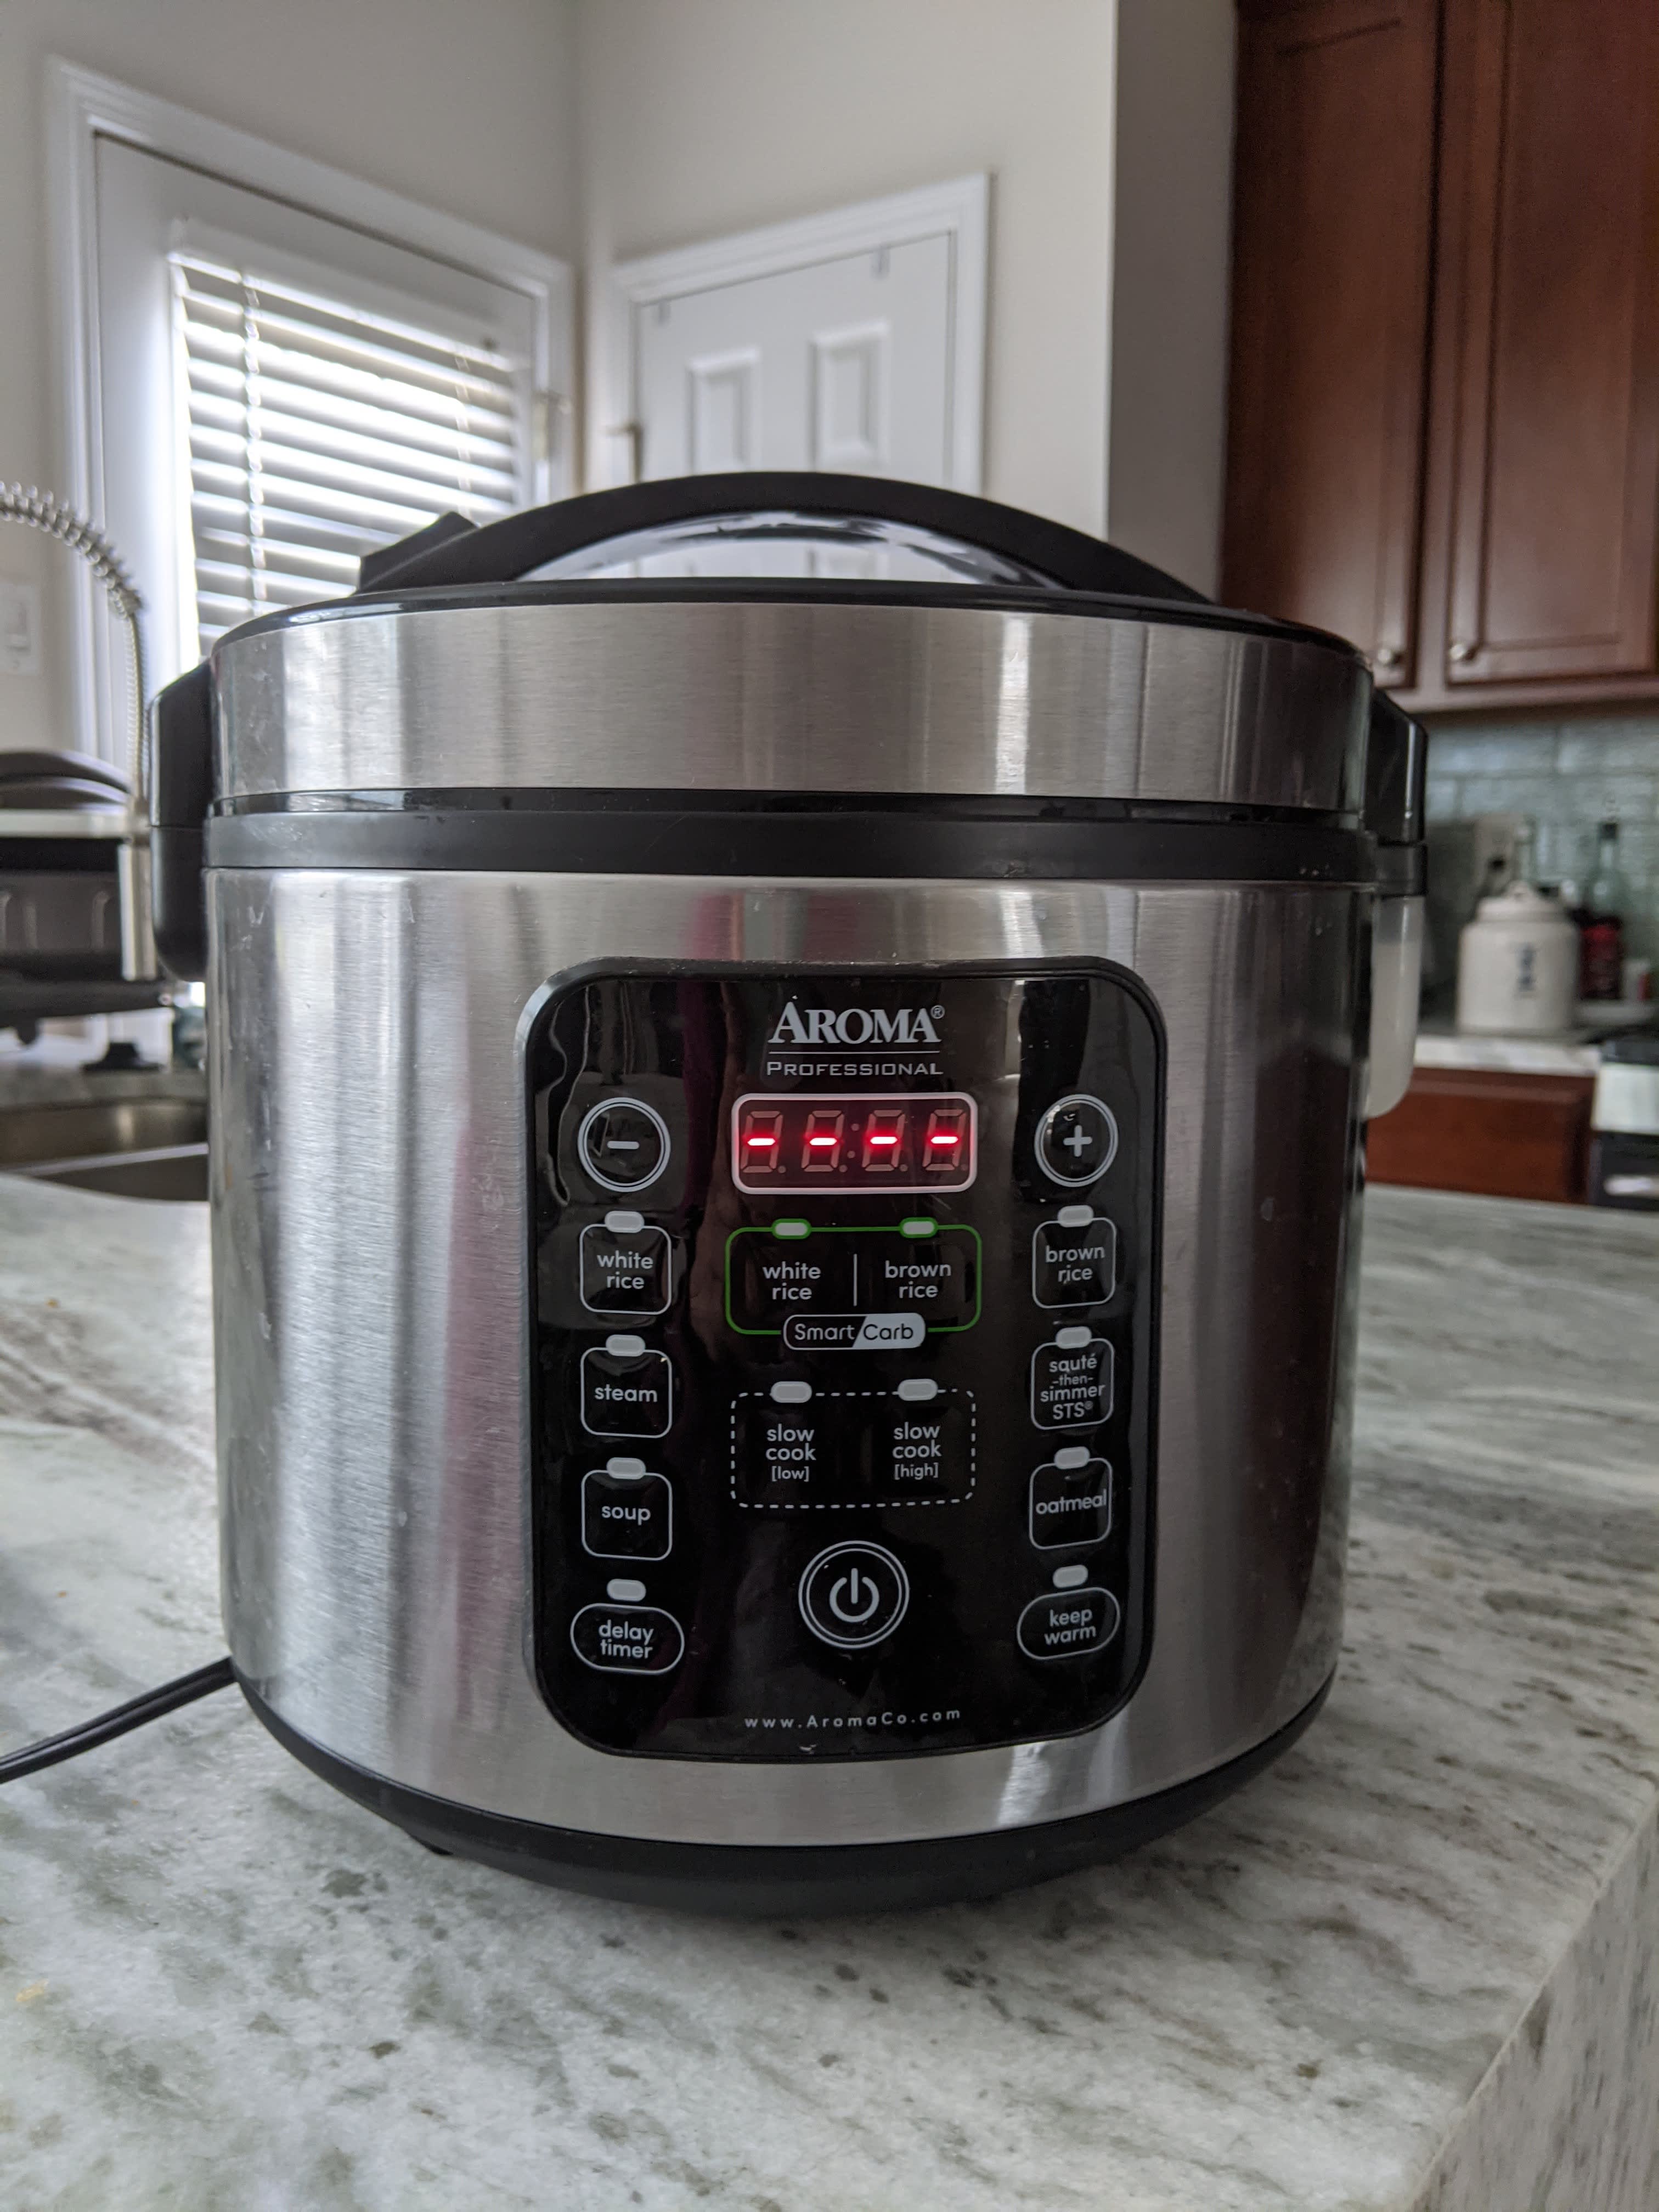 Aroma Professional Plus Rice Cooker Review 